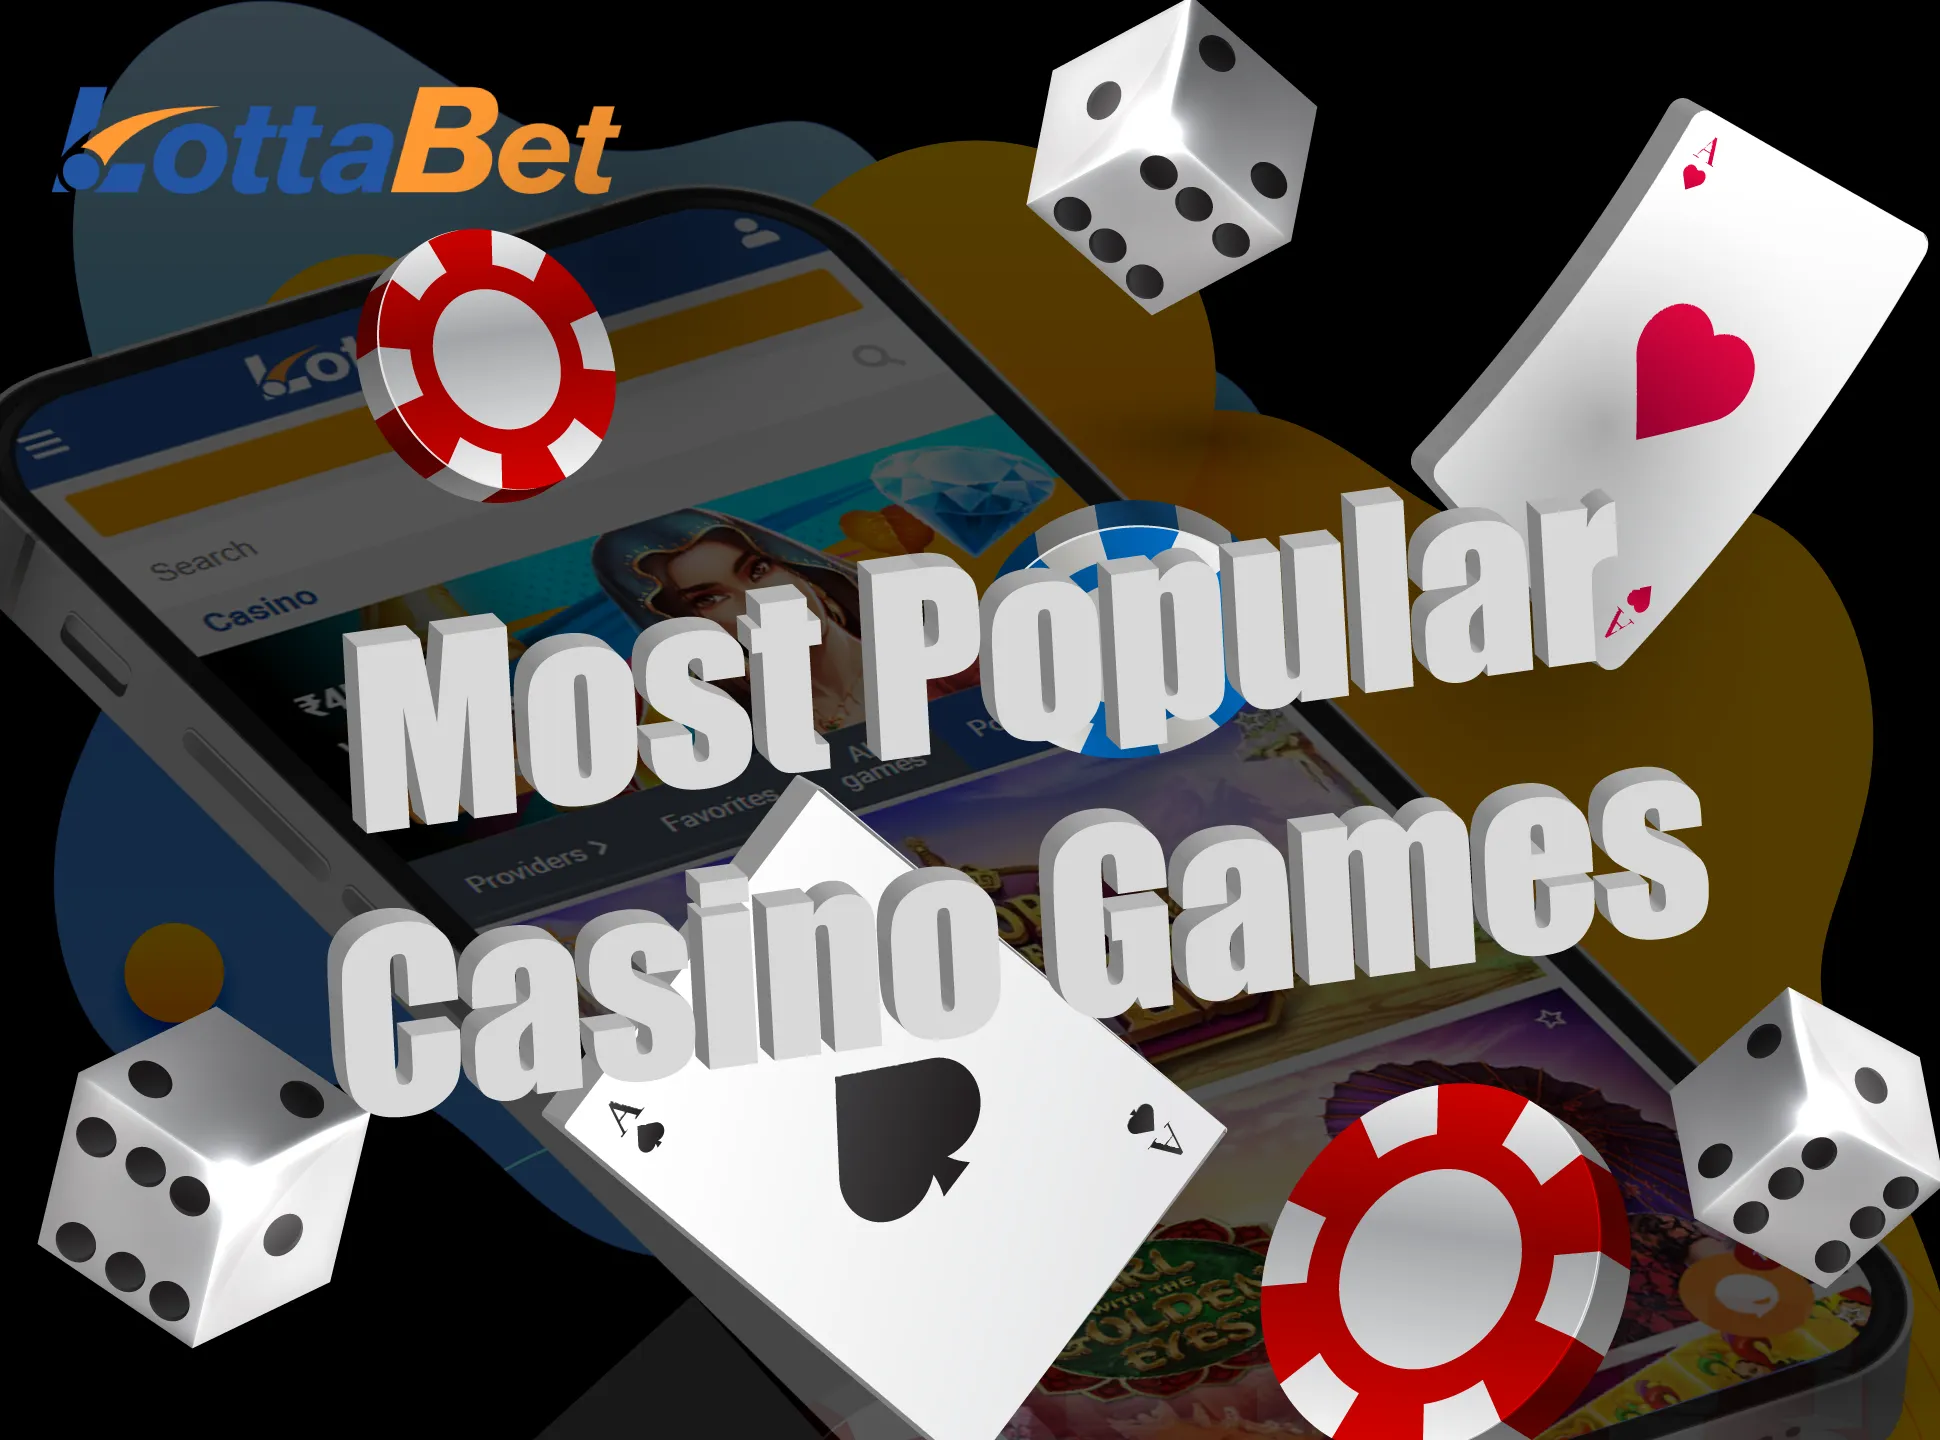 In the Lottabet casino you willfind all the most popular casino games.